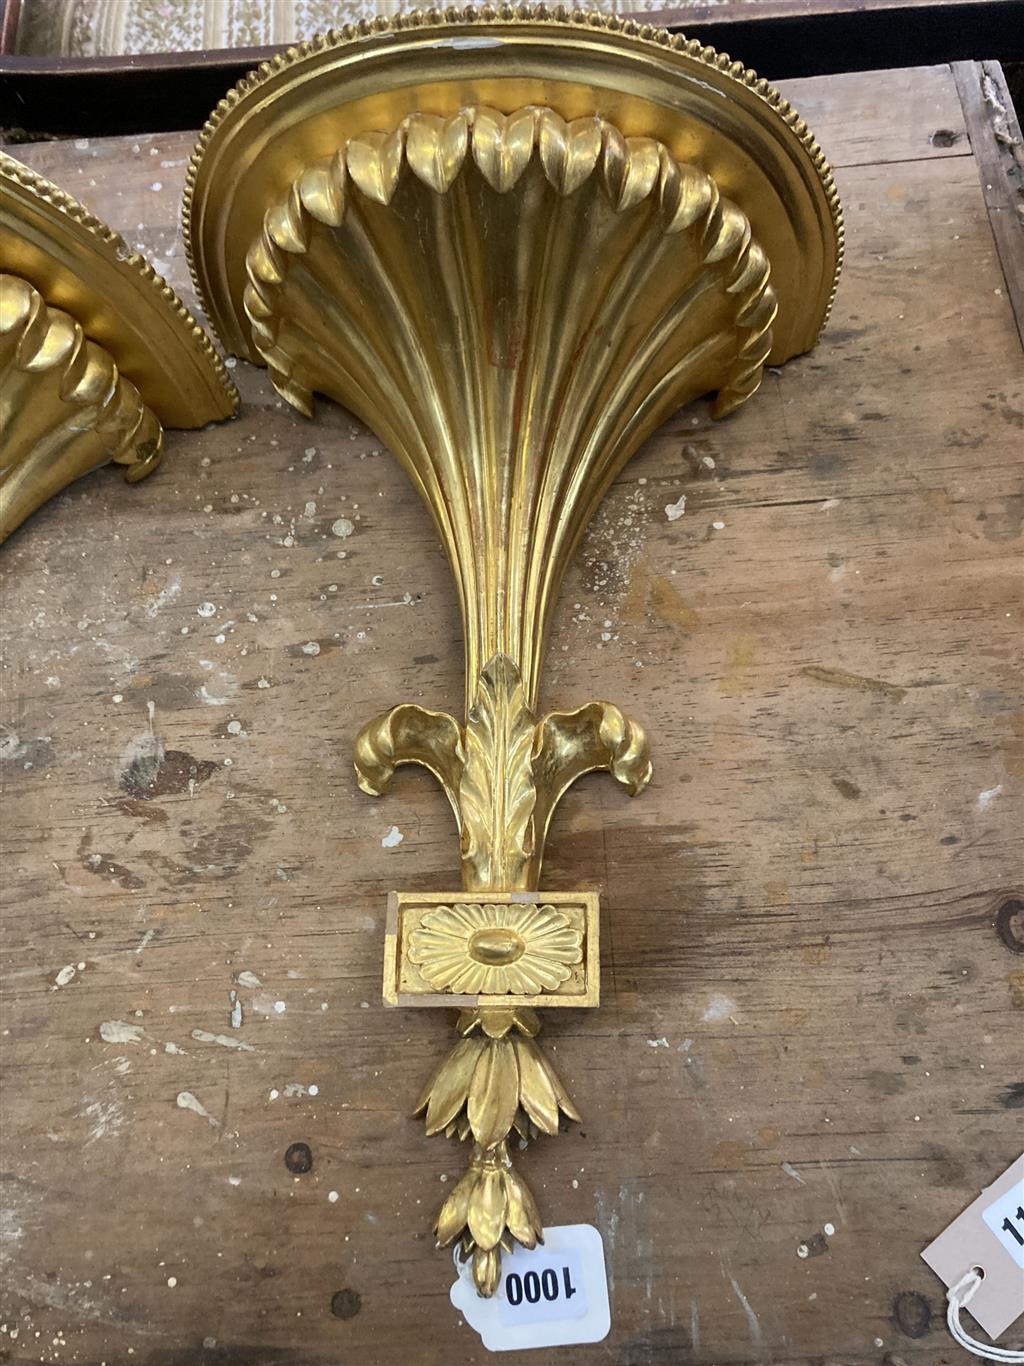 A pair of George III style giltwood wall brackets, height 40cm